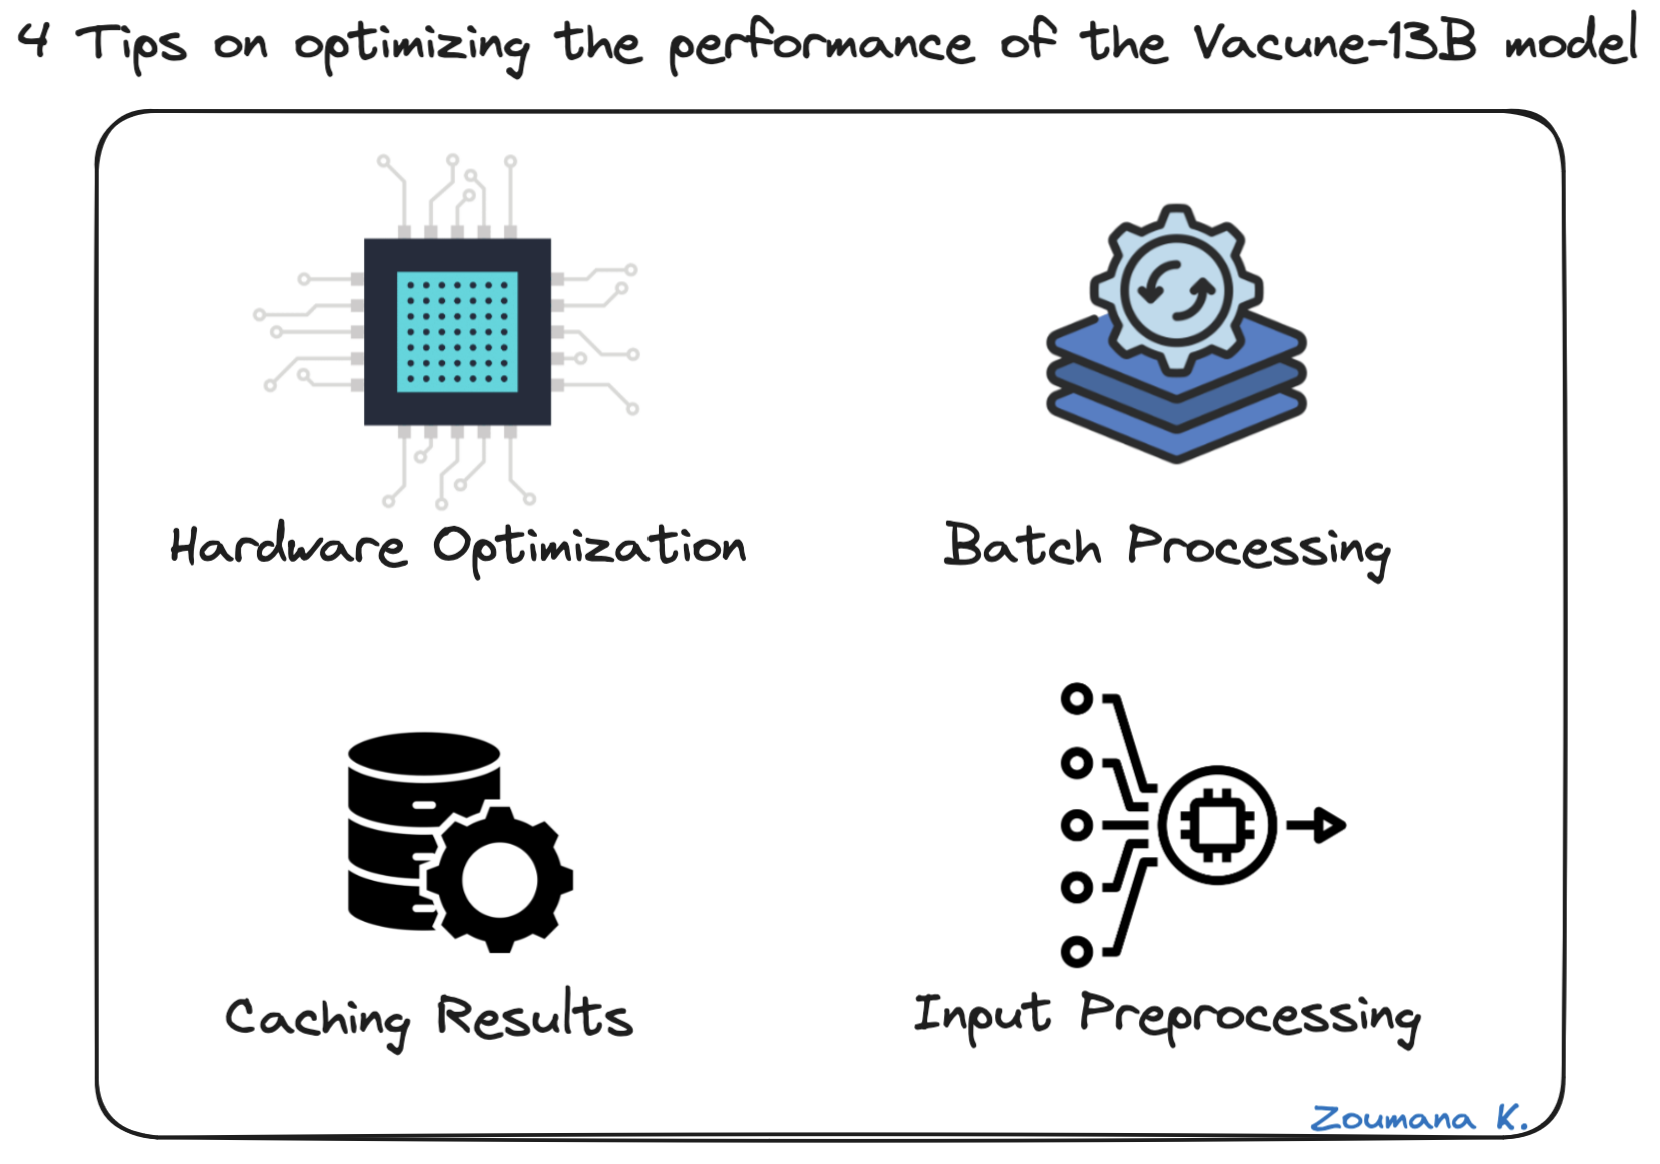 4 tips to optimize the performance of the Vicuna-13B model